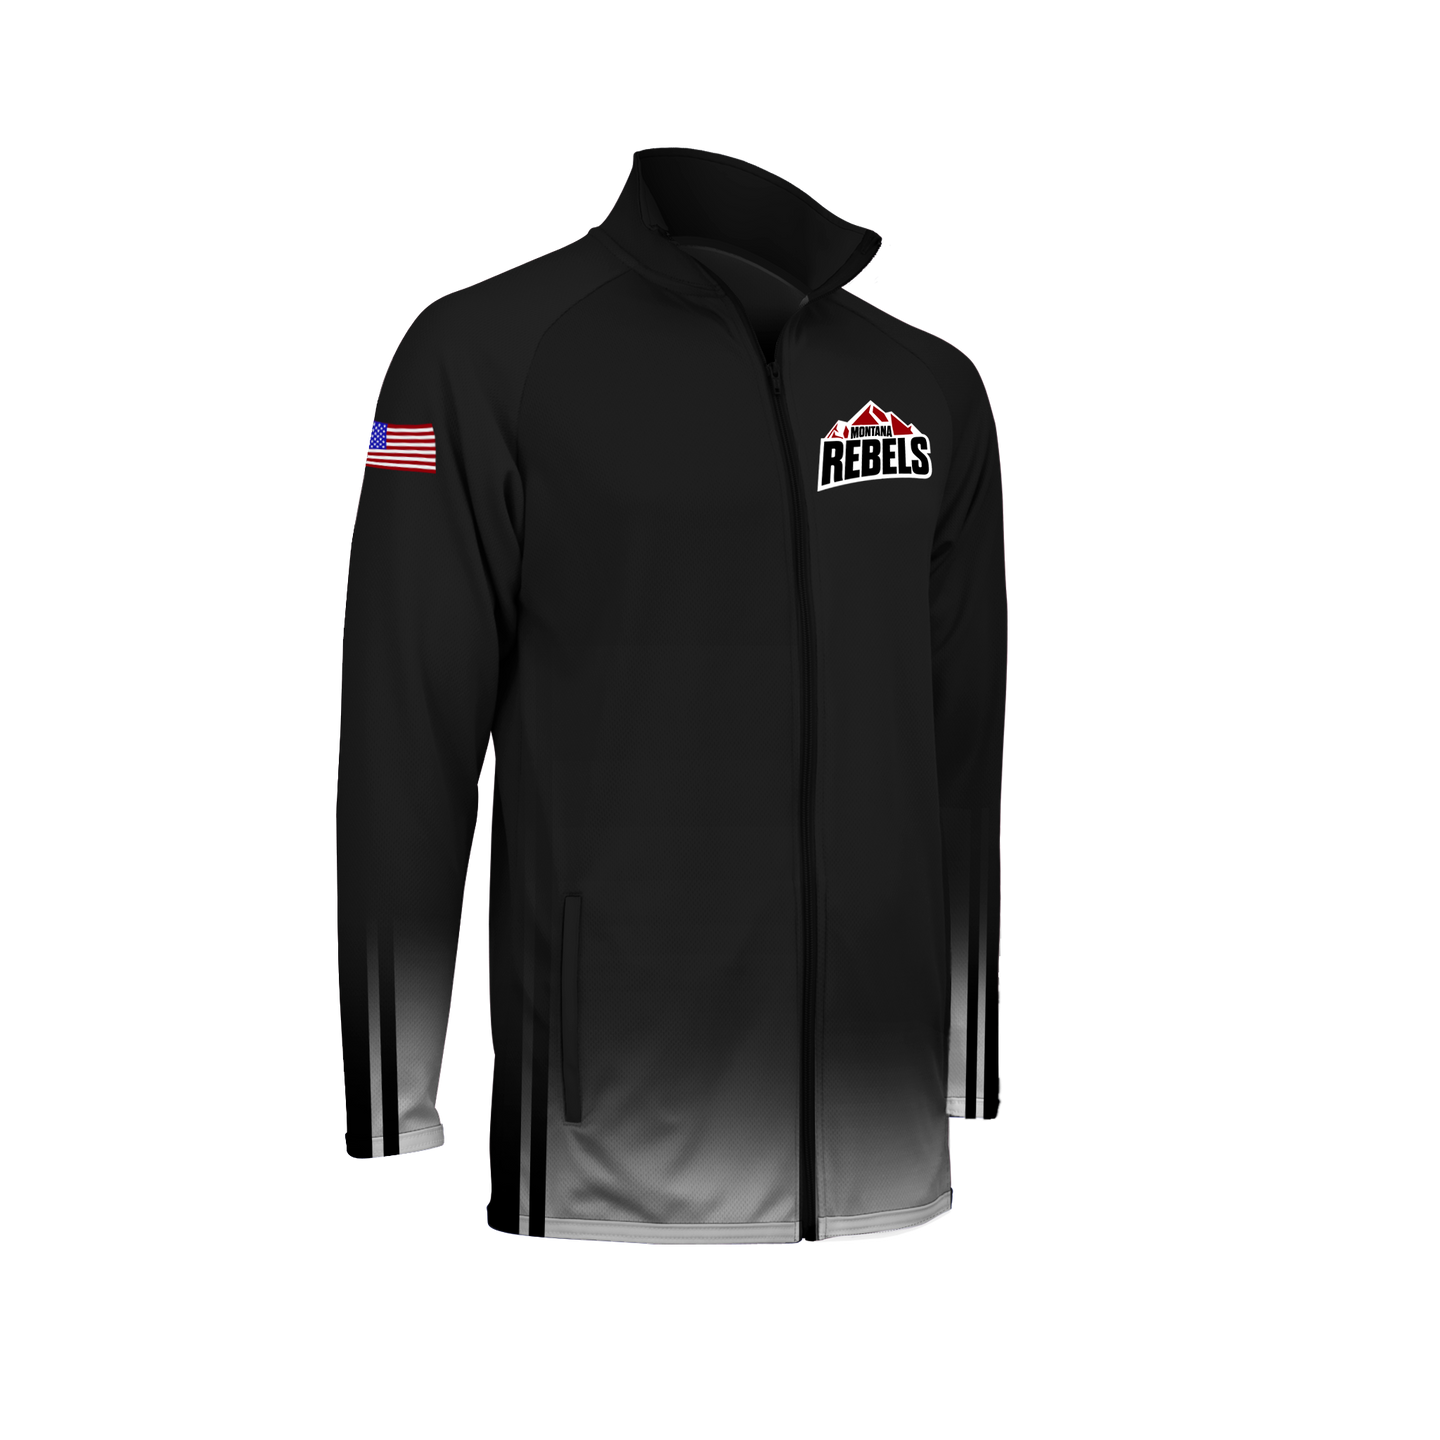 Youth Montana Lady Rebels Full Zip Warm-Up Jacket with Personalization